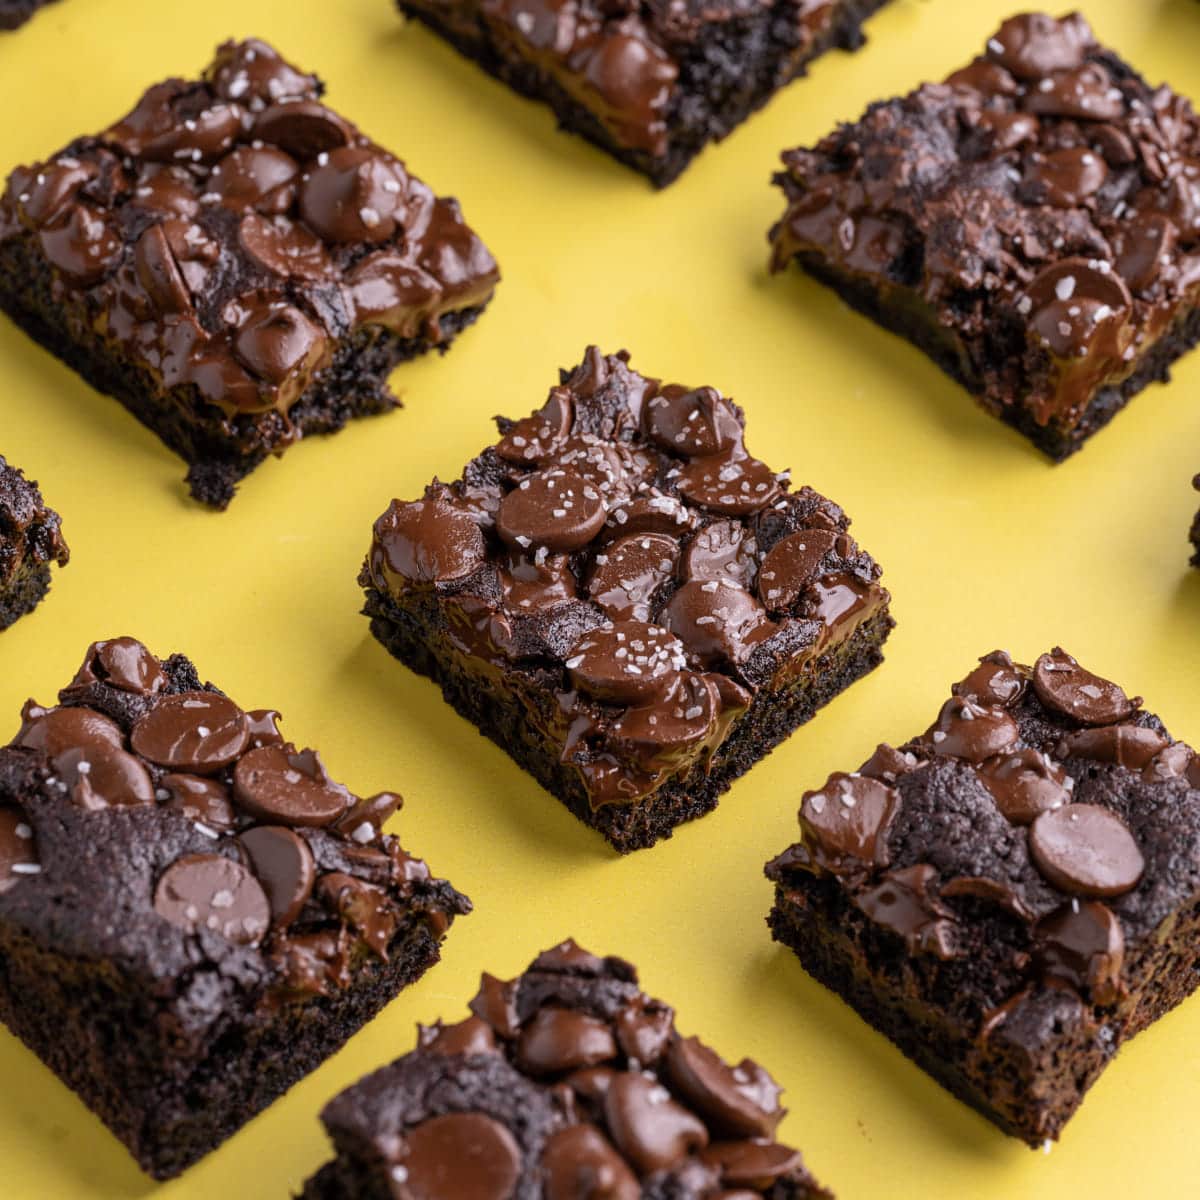 Rows of Fudgy Chocolate Brownies on yellow background